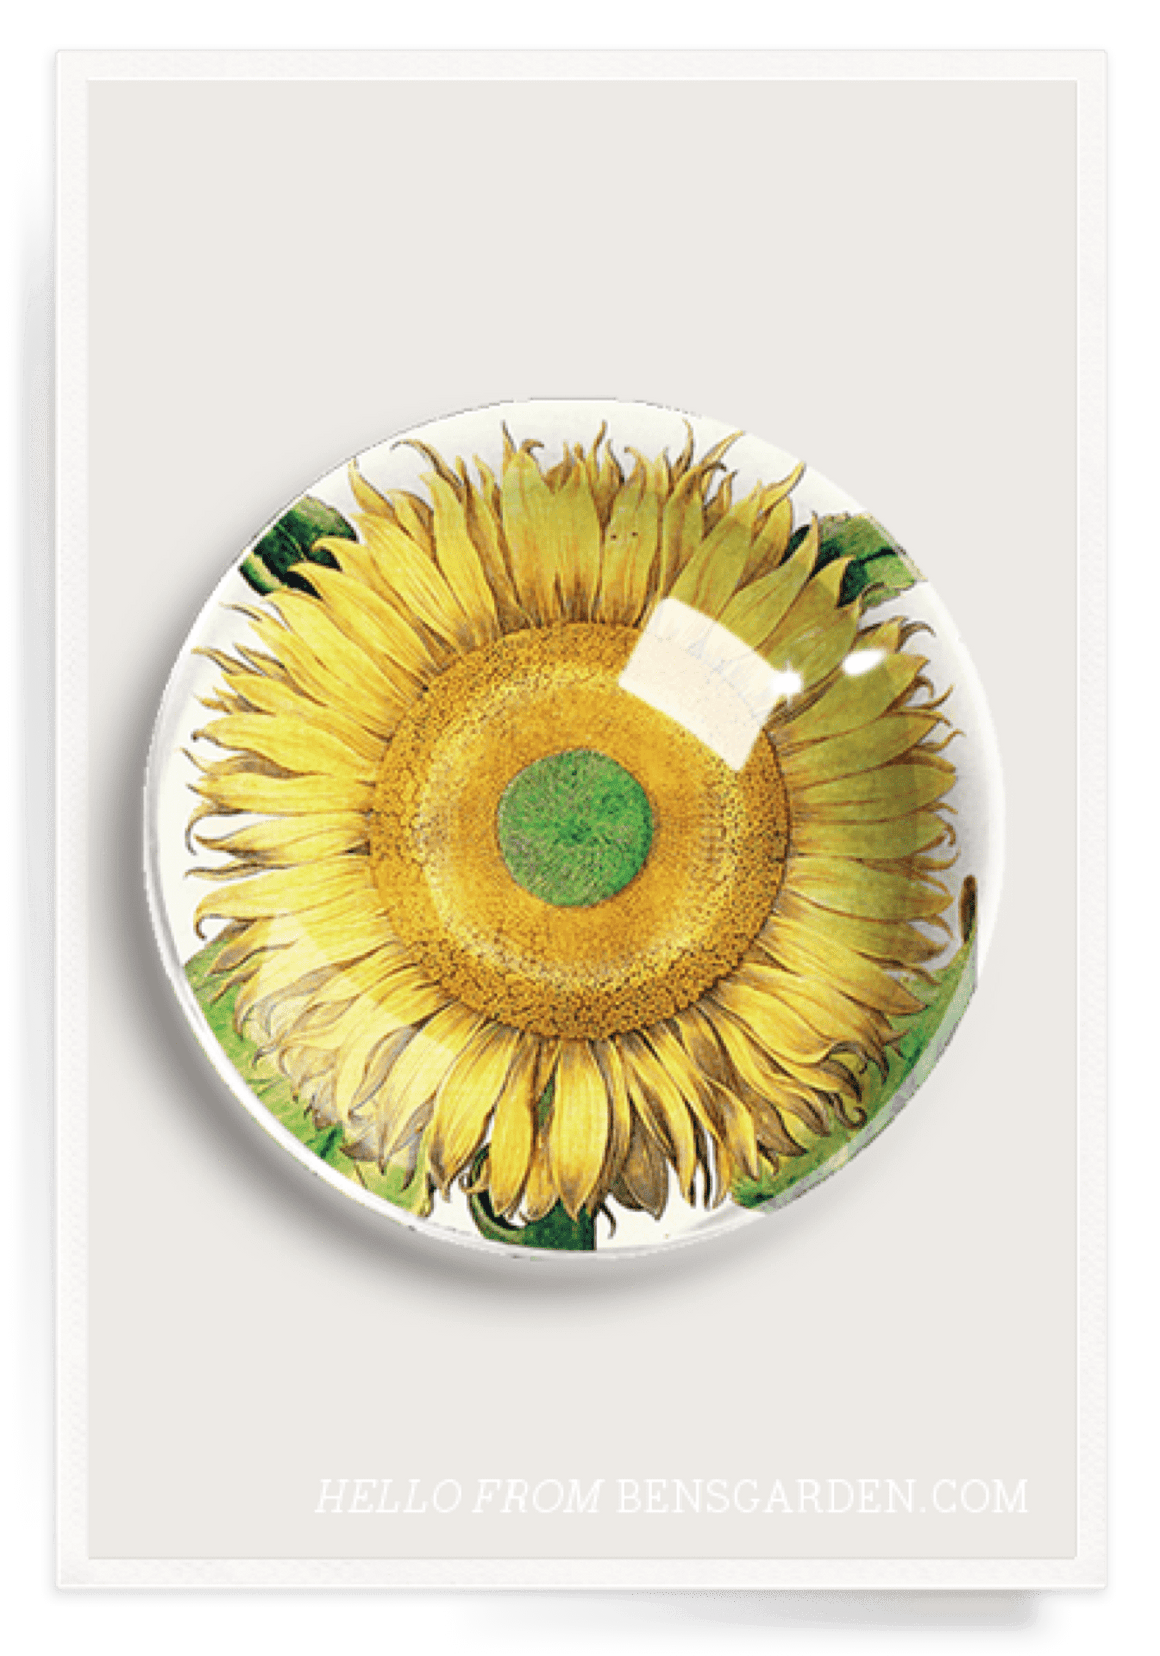 Sunflower No.1 French Crystal Dome Paperweight - Bensgarden.com